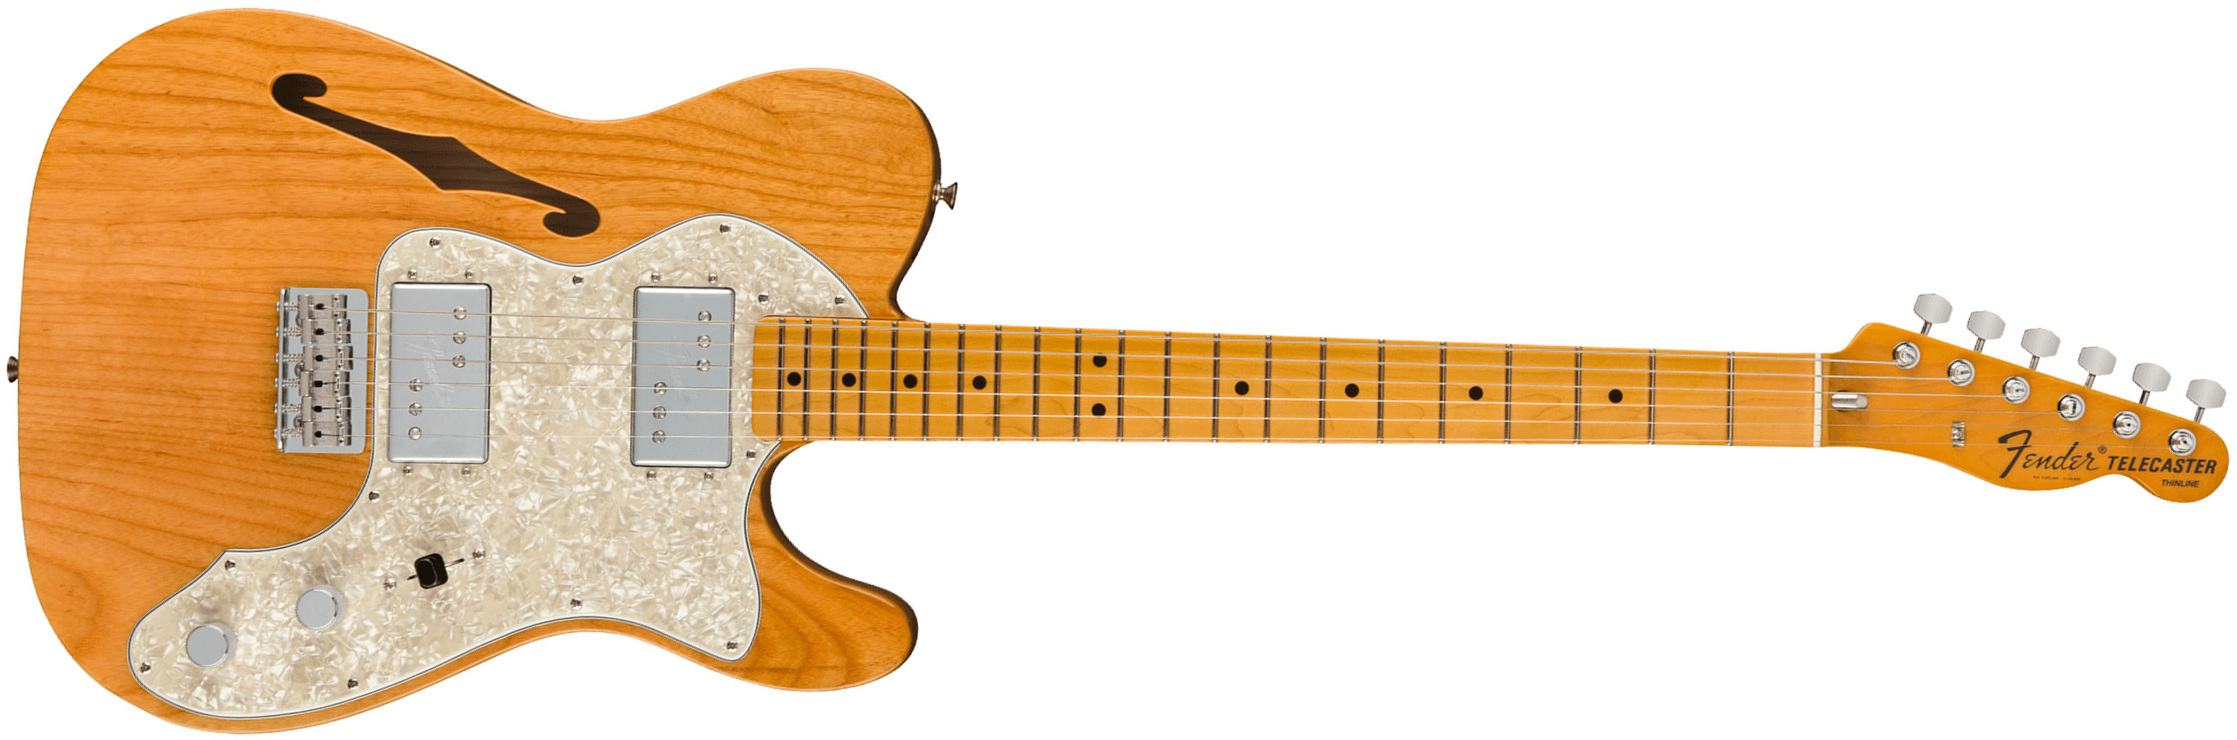 Fender Tele Thinline 1972 American Vintage Ii Usa 2h Ht Mn - Aged Natural - Semi-Hollow E-Gitarre - Main picture